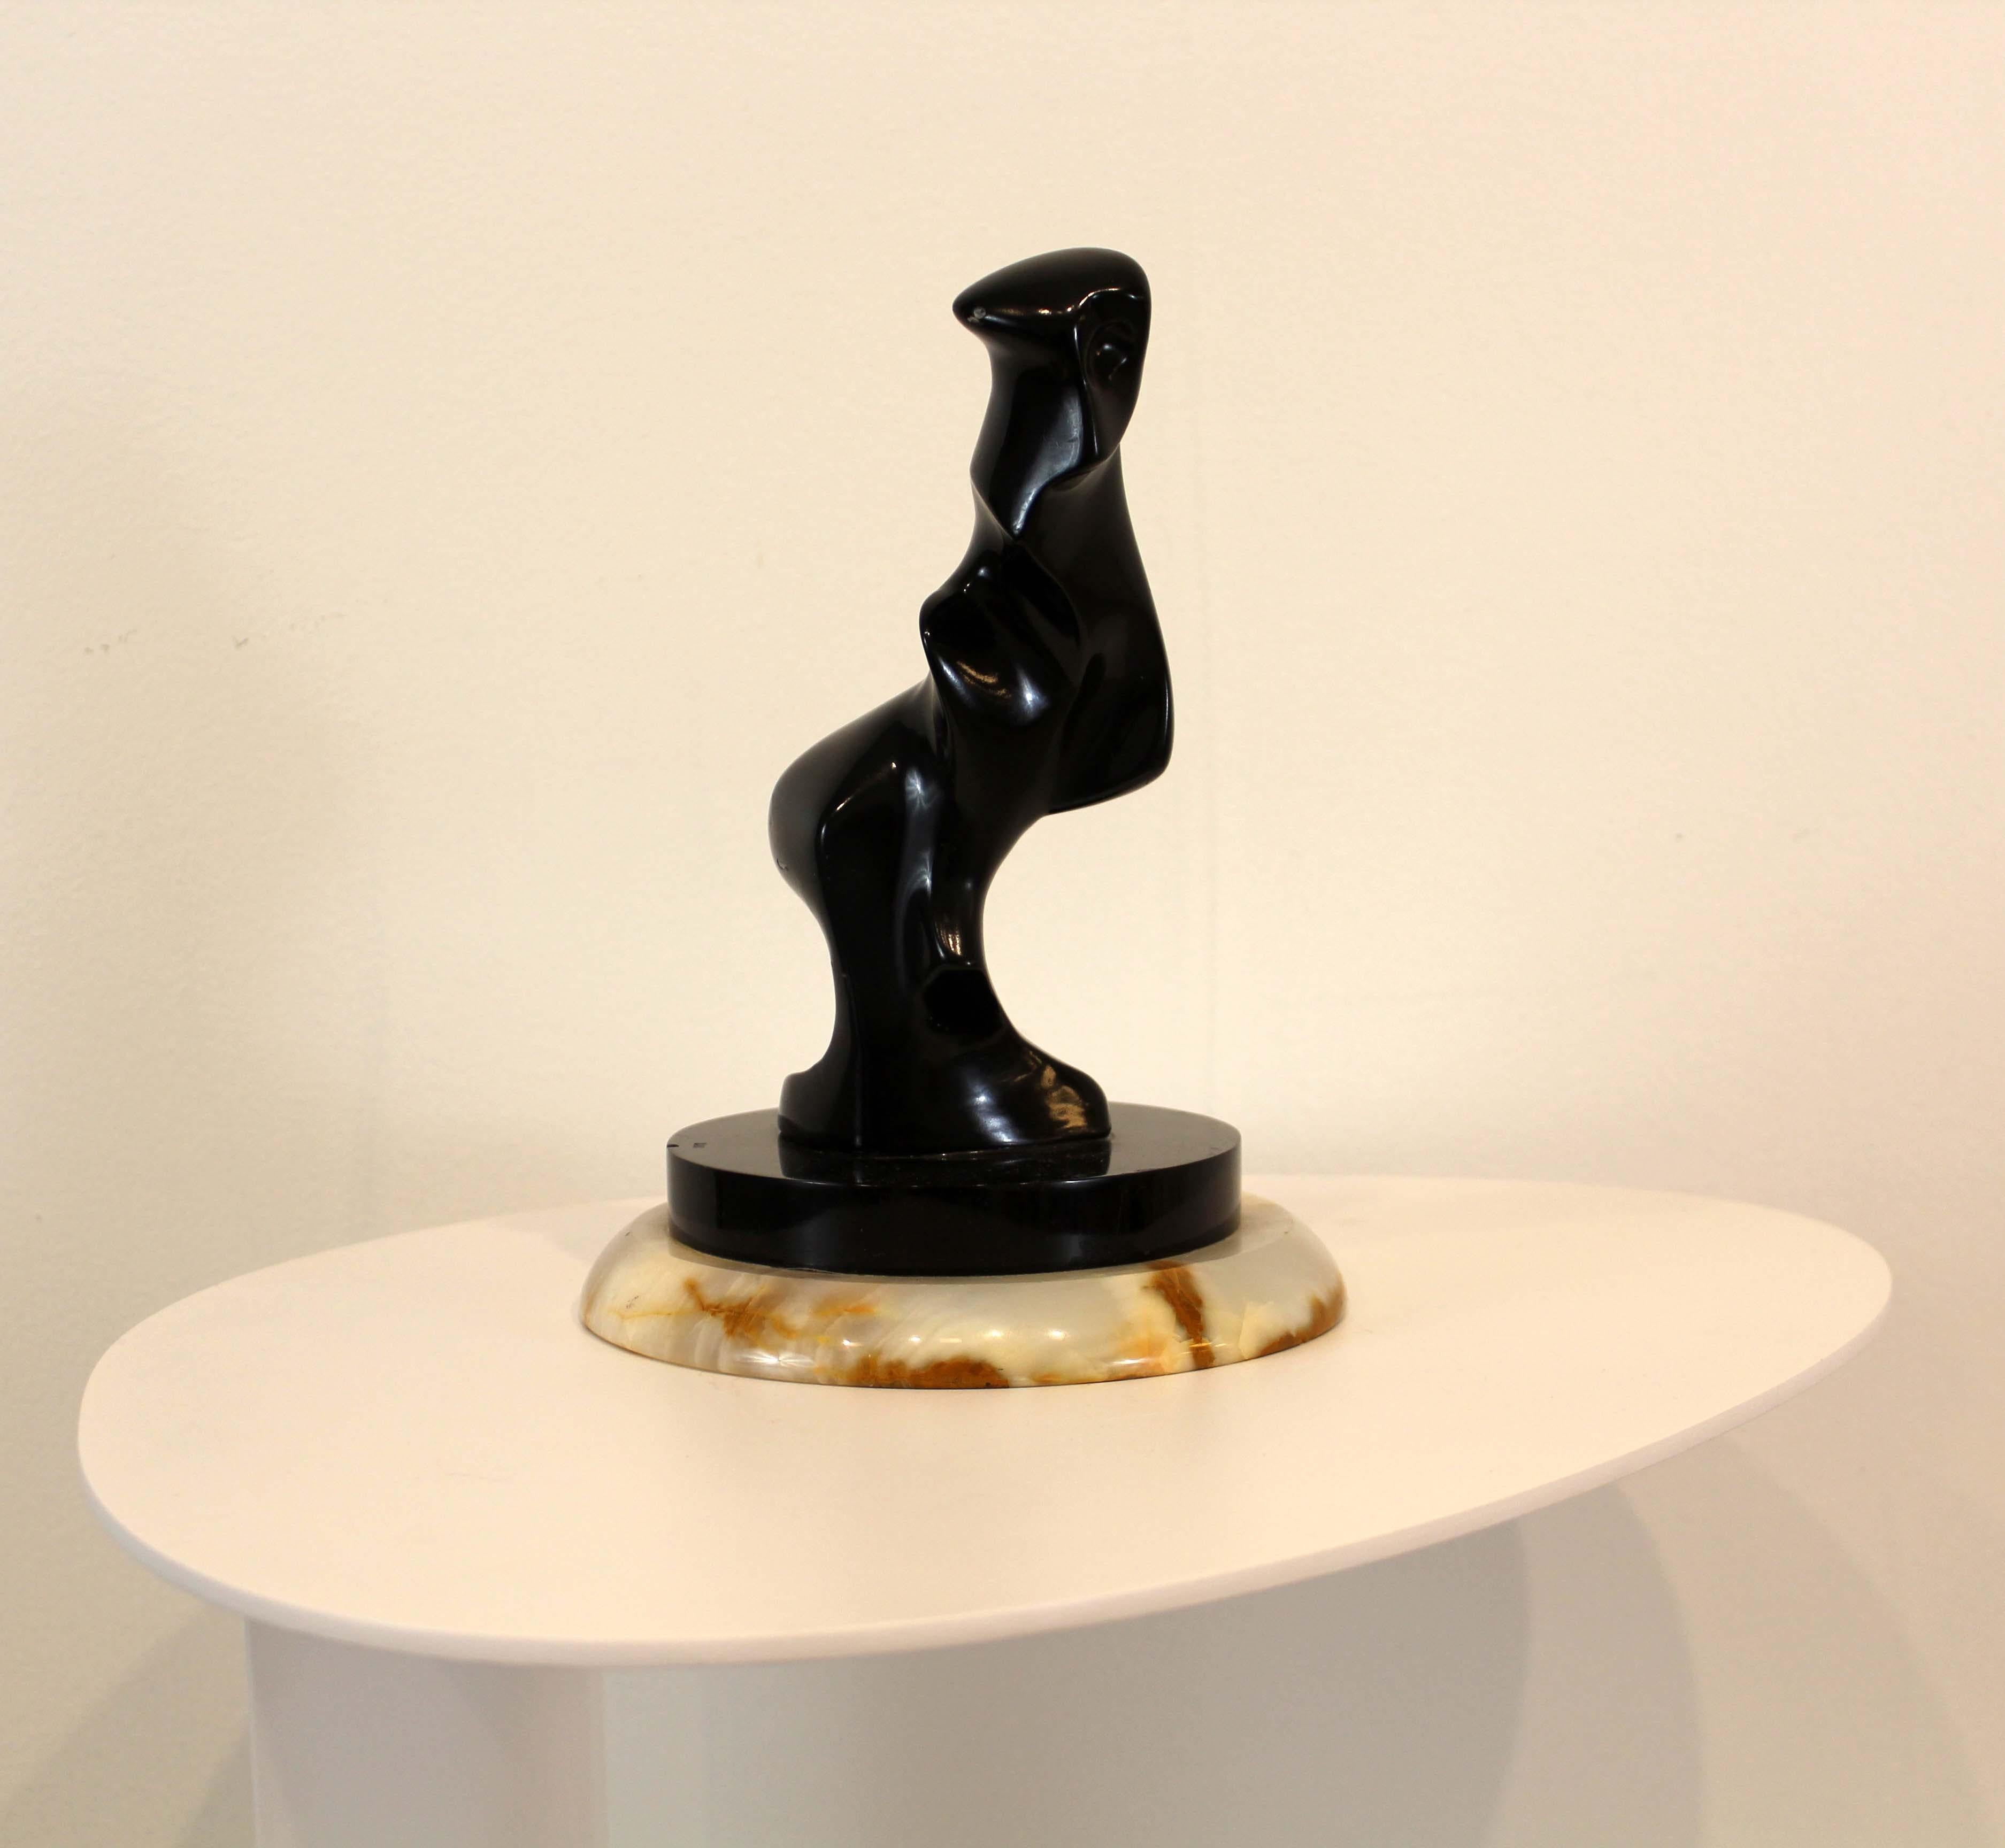 A stunning modern form sculpture on a modern base titled Famous by Detroit sculptor James Nani. Circa 1970s. Dimensions: 9h x 6.75 diameter. In excellent condition.

 James Nani (1926-2016) was a Detroit artist for over 50 years and is known